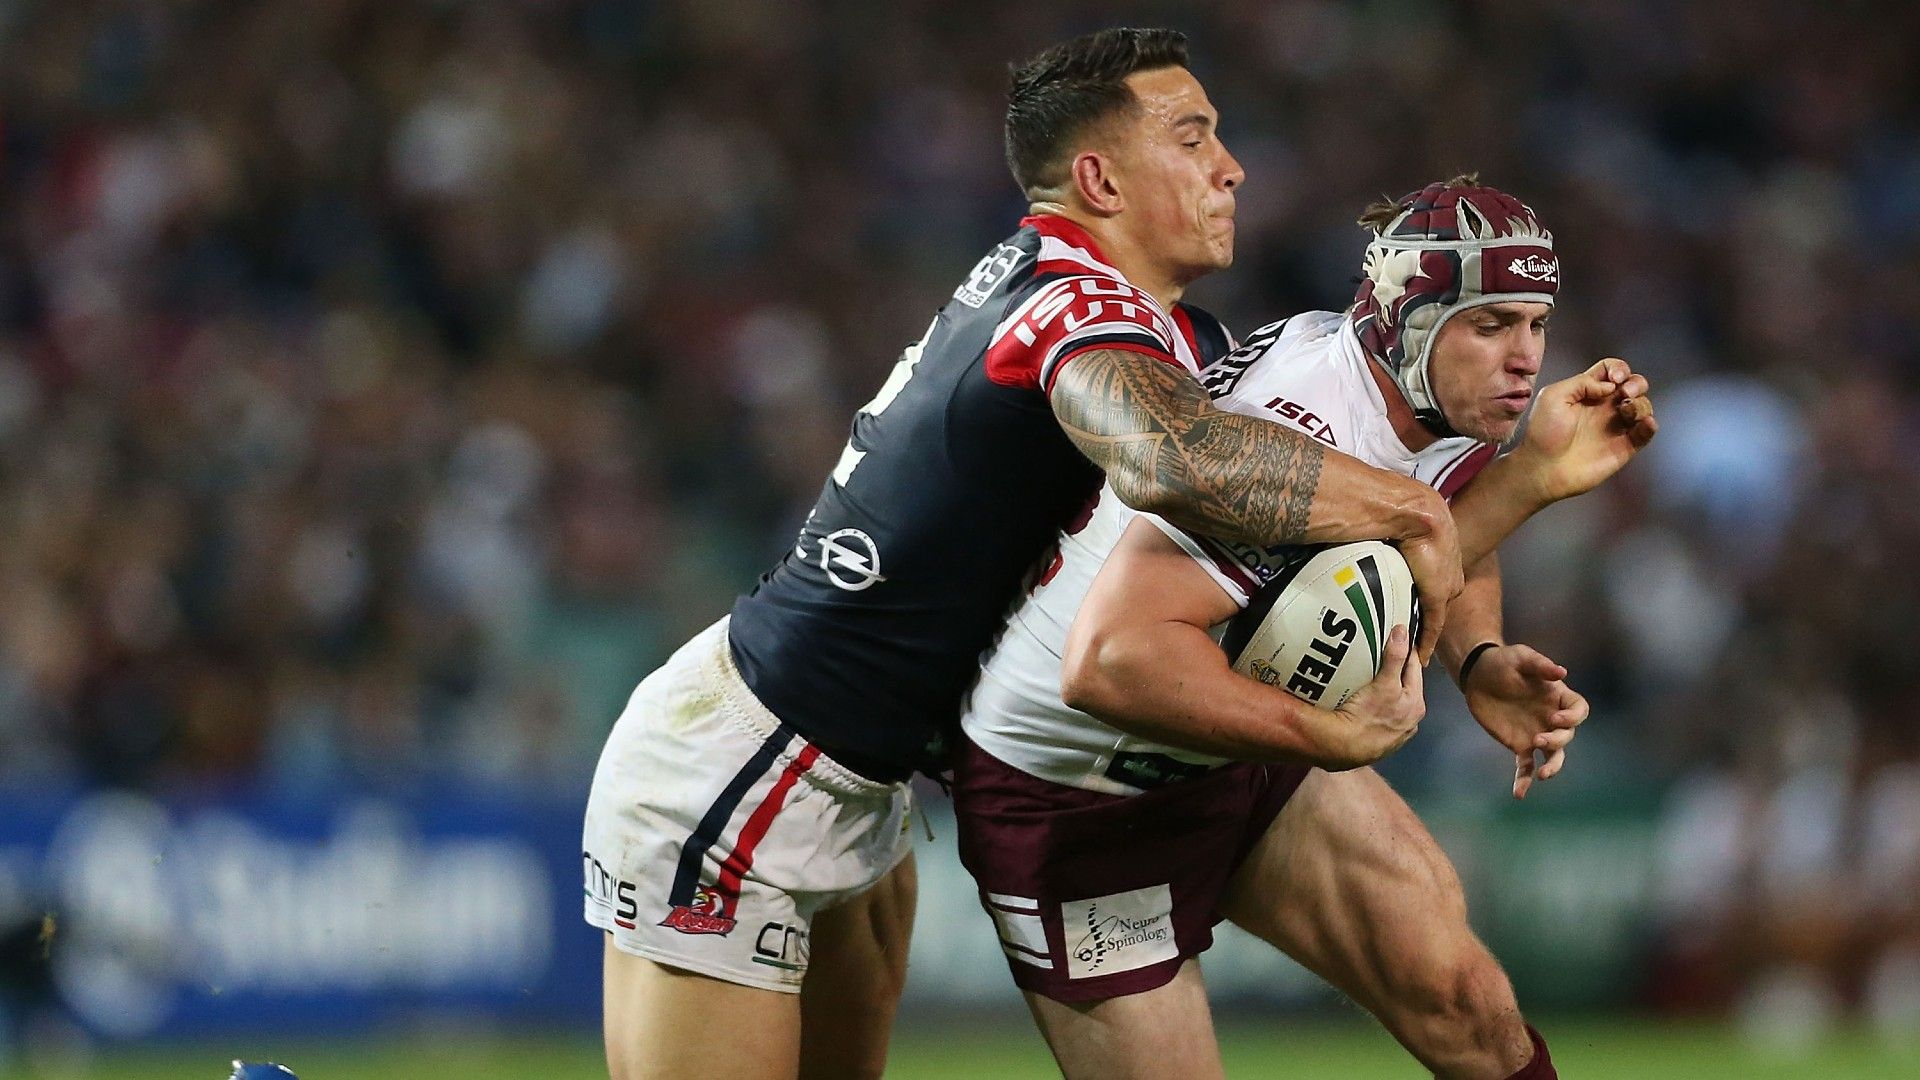 EXCLUSIVE: George Rose, Phil Gould recall a Manly v Sydney Roosters final we should never forget